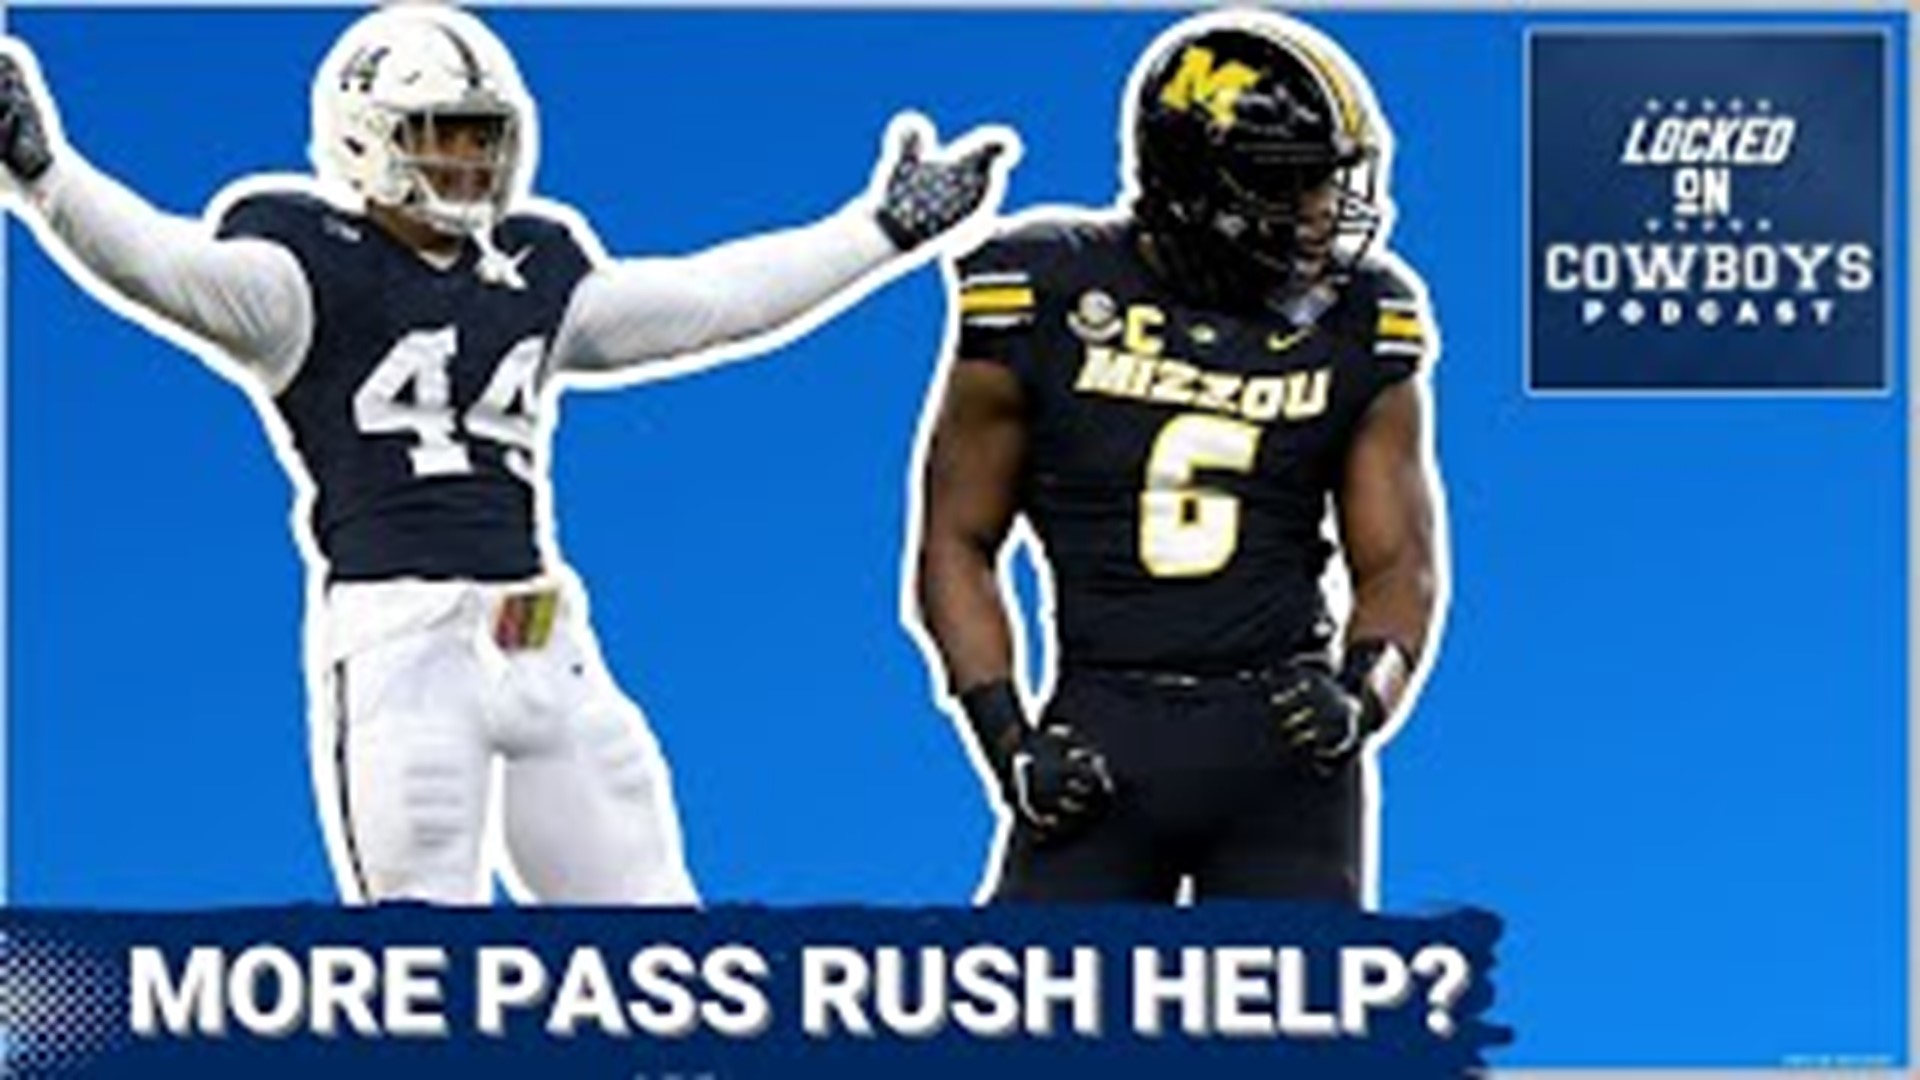 The Dallas Cowboys appear to be interested in adding another top-end defensive lineman to their defense. Which pass-rusher would make the most sense for the Cowboys?